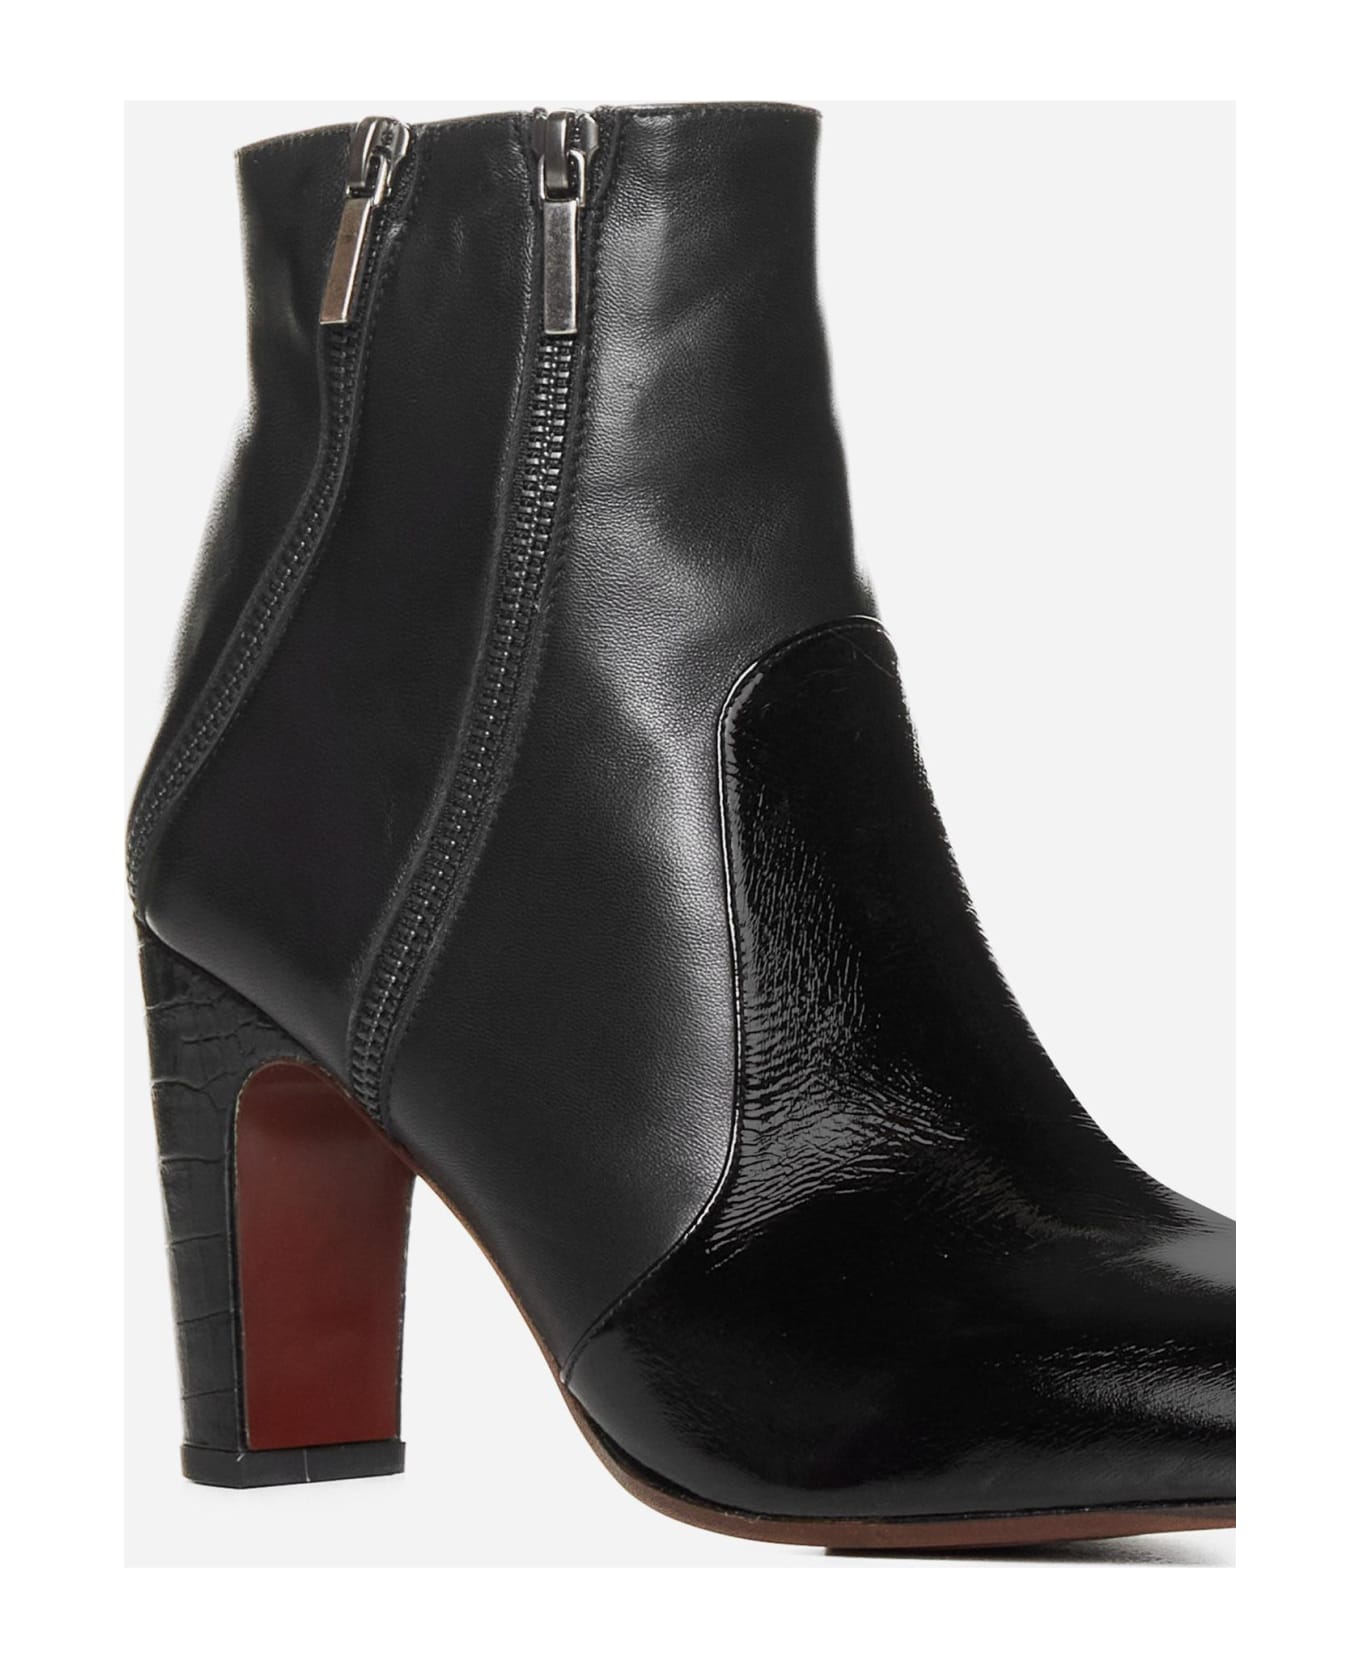 Chie Mihara Ezapi Leather Ankle Boots - BLACK